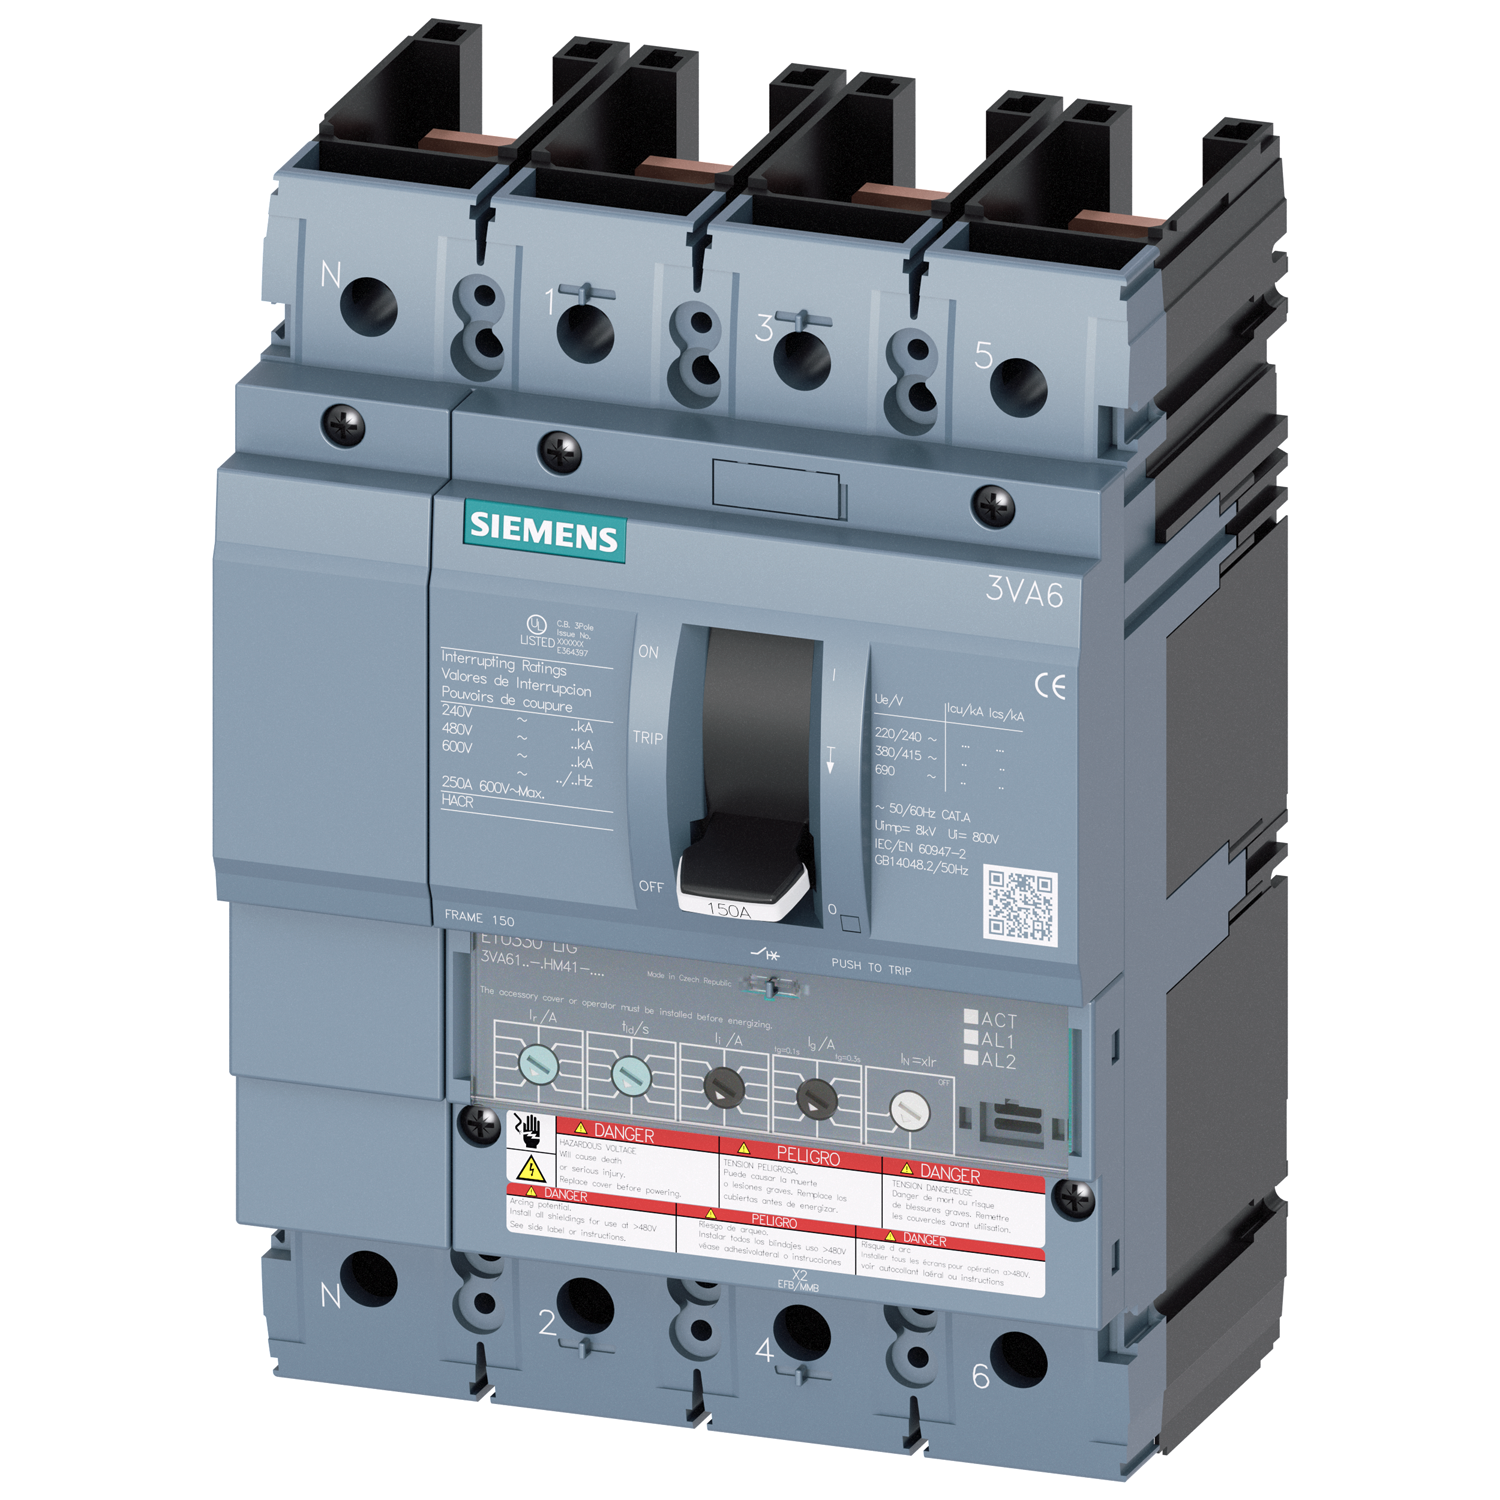 SIEMENS LOW VOLTAGE 3VA UL MOLDED CASE CIRCUIT BREAKER WITH ELECTRONIC TRIP UNIT. 3VA61 FRAME WITH EXTREMELY HIGH (CLASS L) BREAKING CAPACITY. 40A 4-POLE (50KAIC AT 600V) (150KAIC AT 480V). ETU330 TRIP UNIT LIG. SPECIAL FEATURES WITHOUT LUGS. DIMENSIONS (W x H x D) IN 5.5 x 7.8 x 4.2.